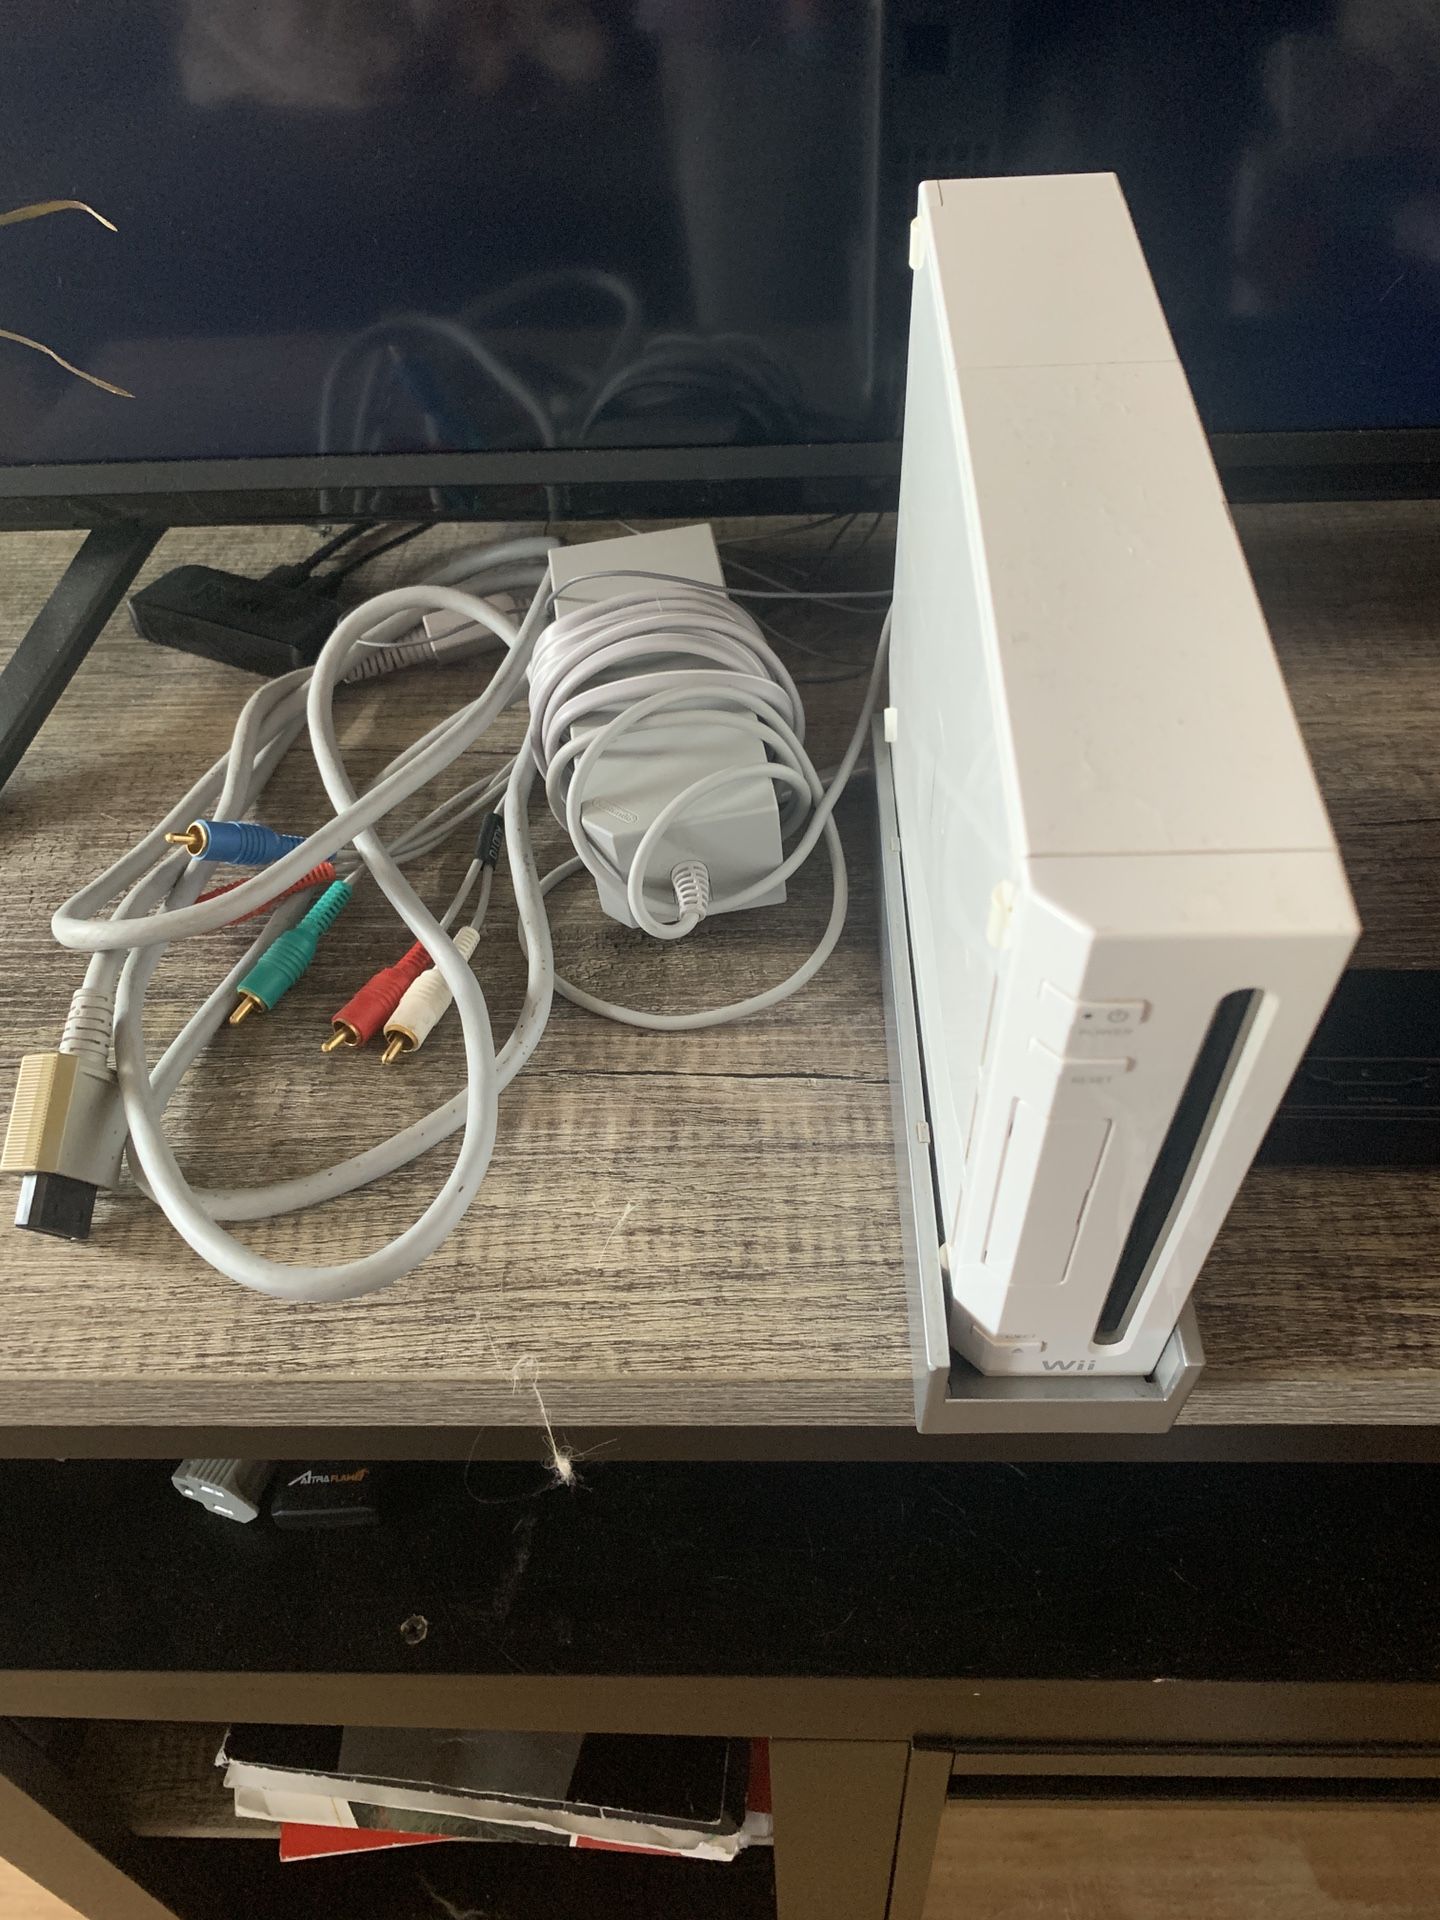 Nintendo Wii System w/ Wii U motion bar included. (System and Motion Bar Only)